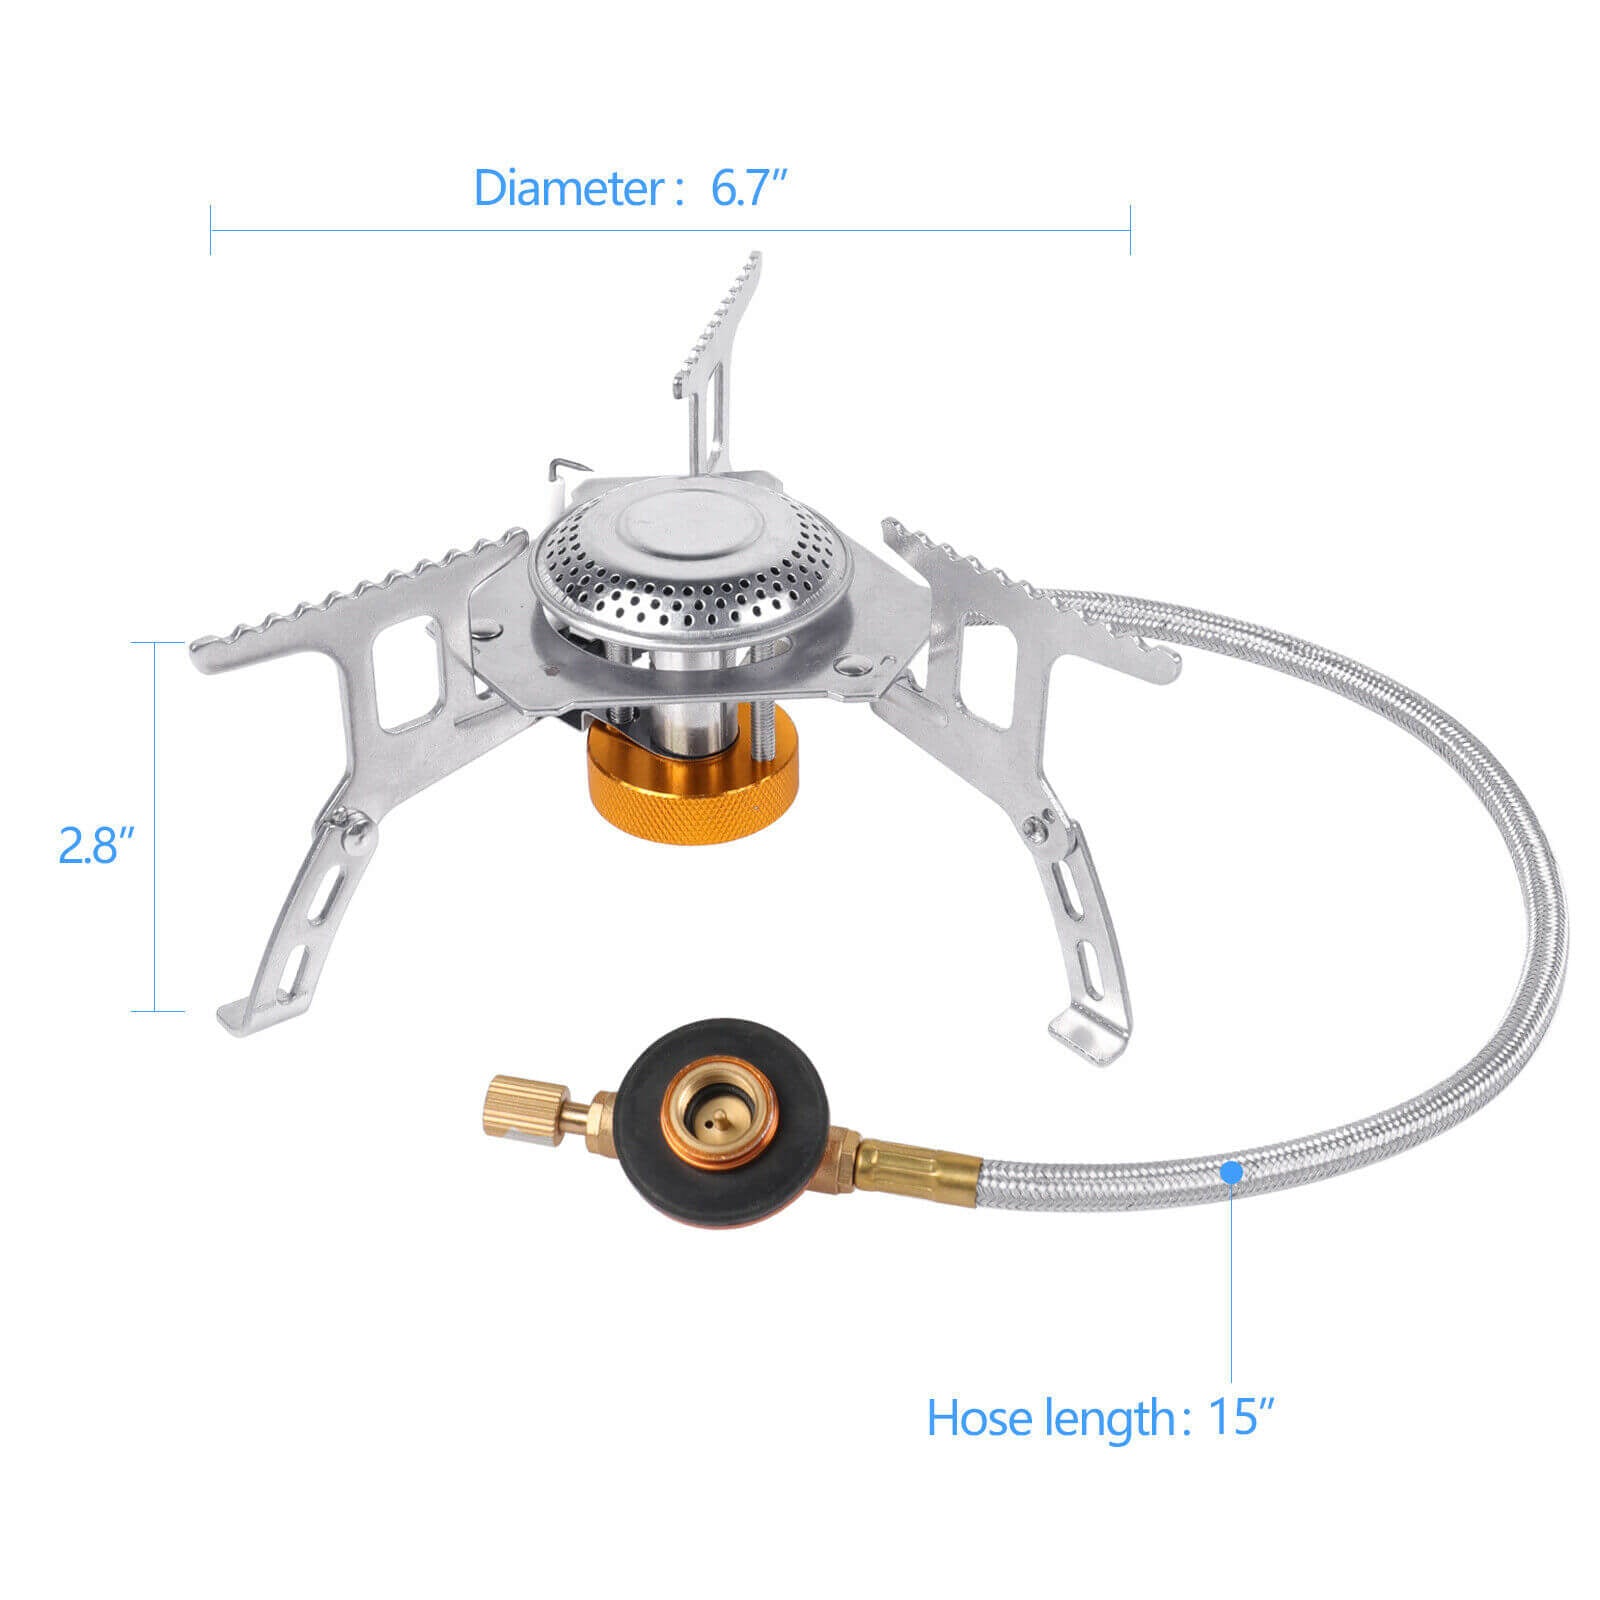 size of Portable Camping Gas Stove Set